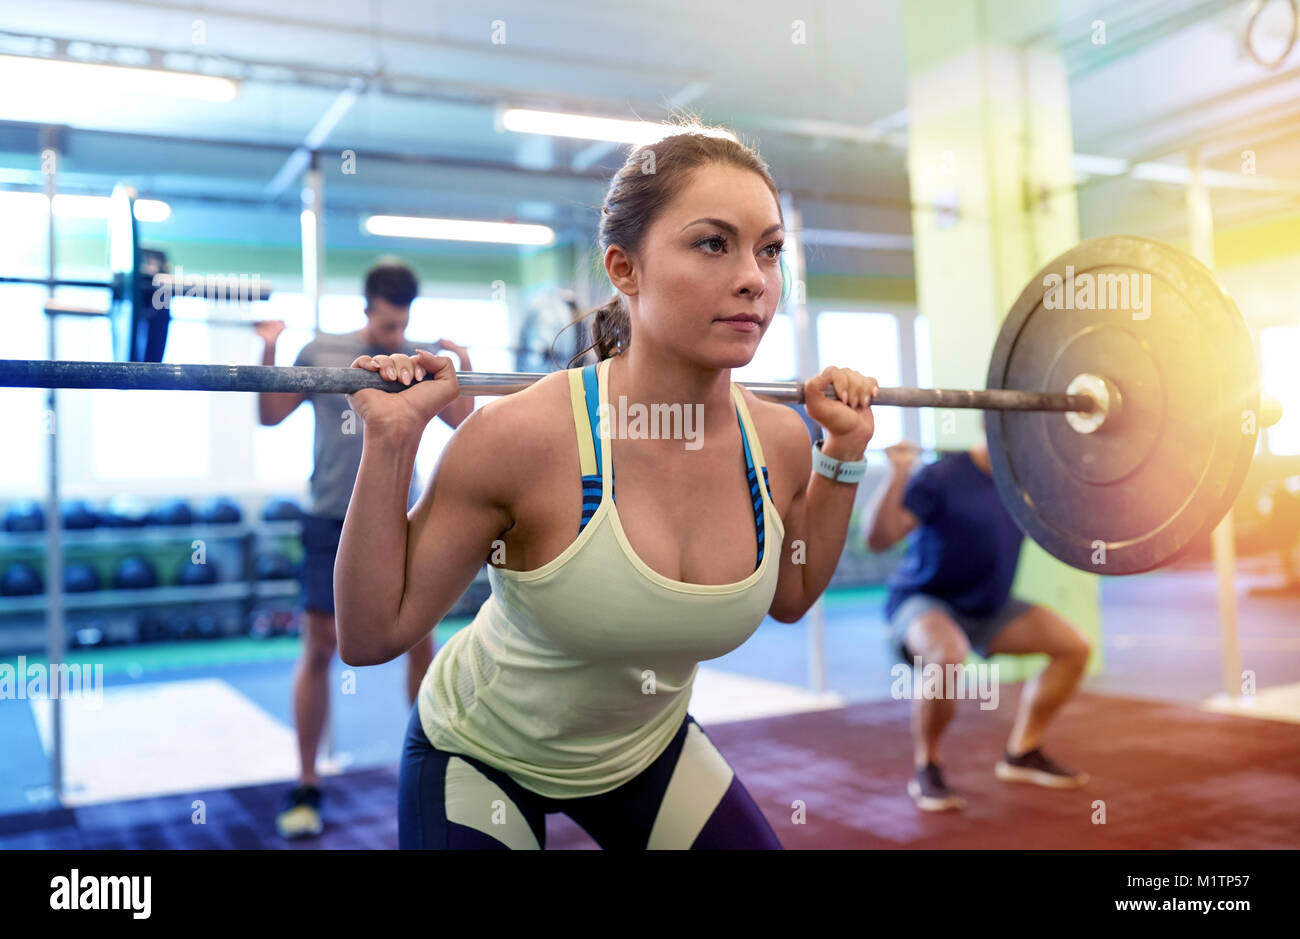 group of people training with barbells in gym Stock Photo